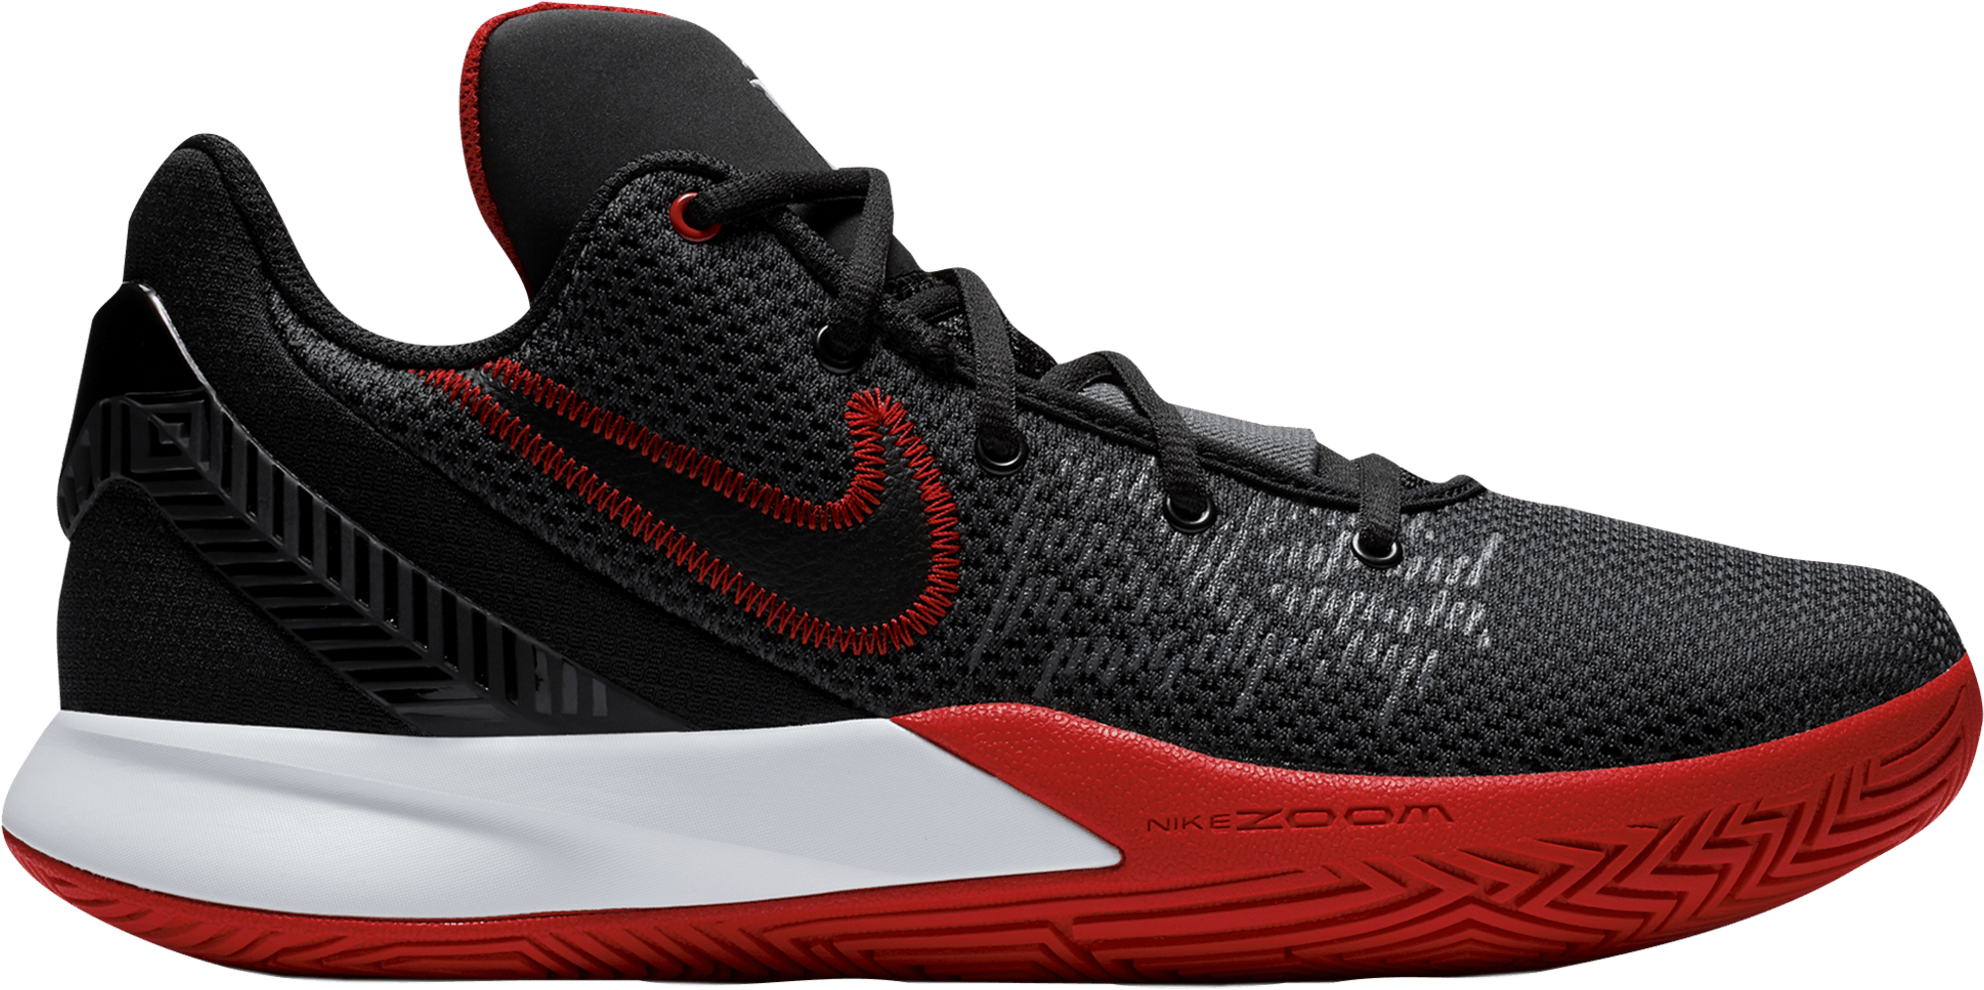 Nike Kyrie Flytrap 2 - Review, Deals, Pics of 11 Colorways